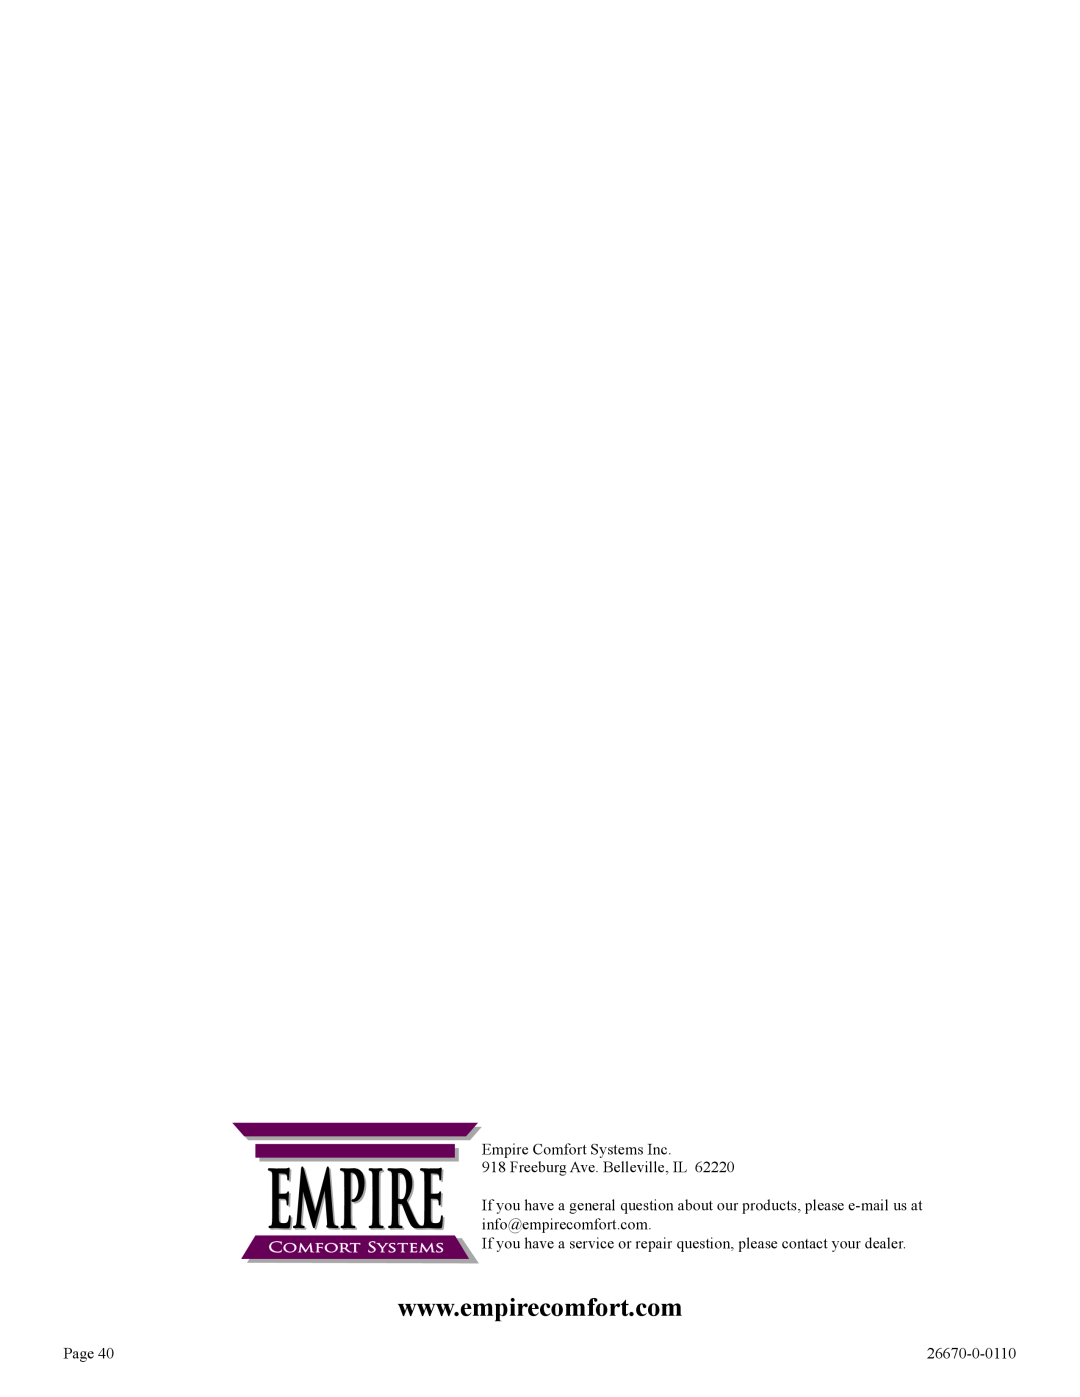 Empire Comfort Systems VFP36SP32EN-2 Empire Comfort Systems Inc, EMPIRE 918 Freeburg Ave. Belleville, IL, Page 